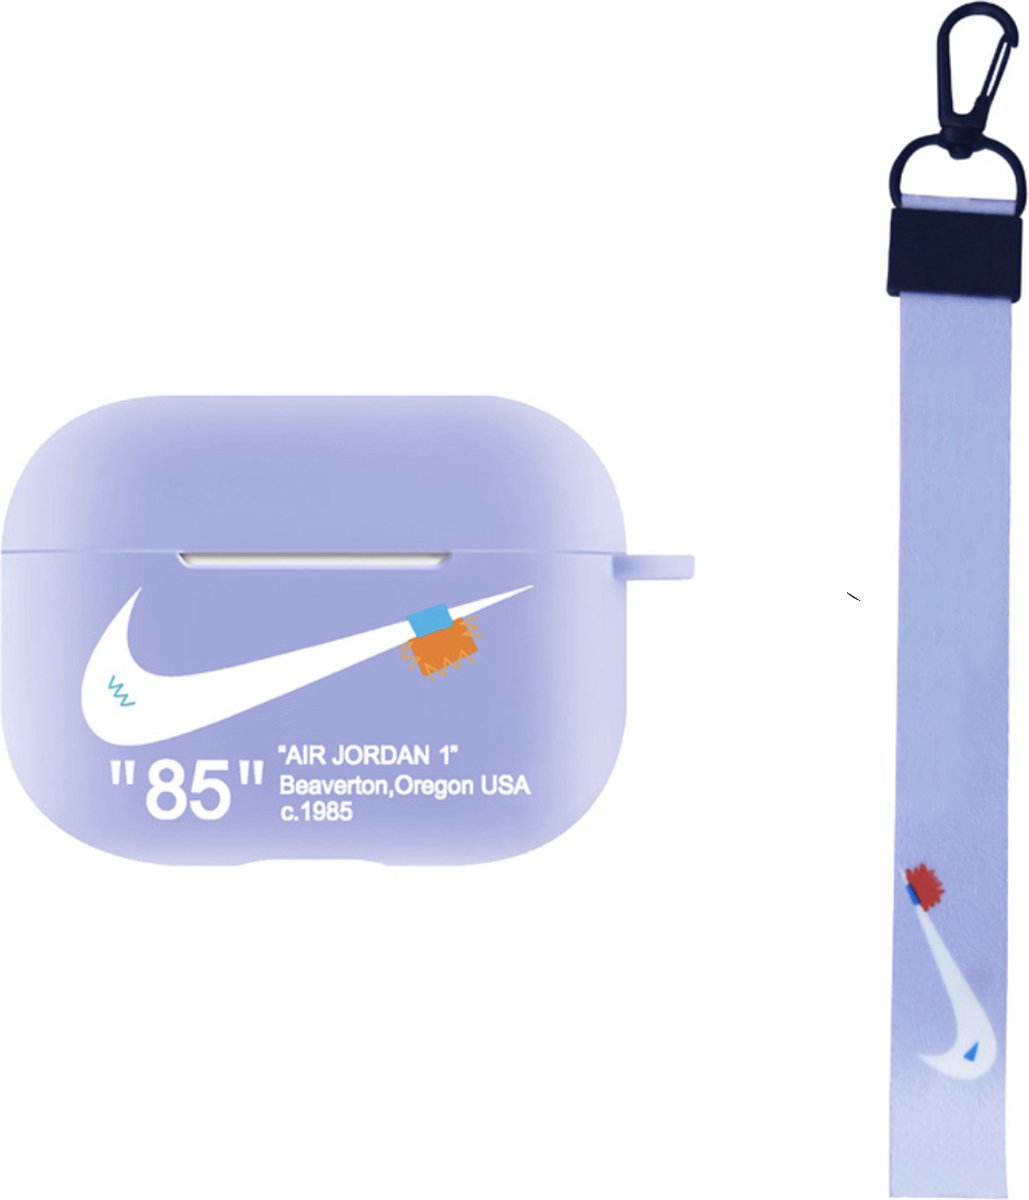 Airpods Pro Case - Air Jordan 1 with Cord Purple - Airpods Pro Hoesje Paars - Nike